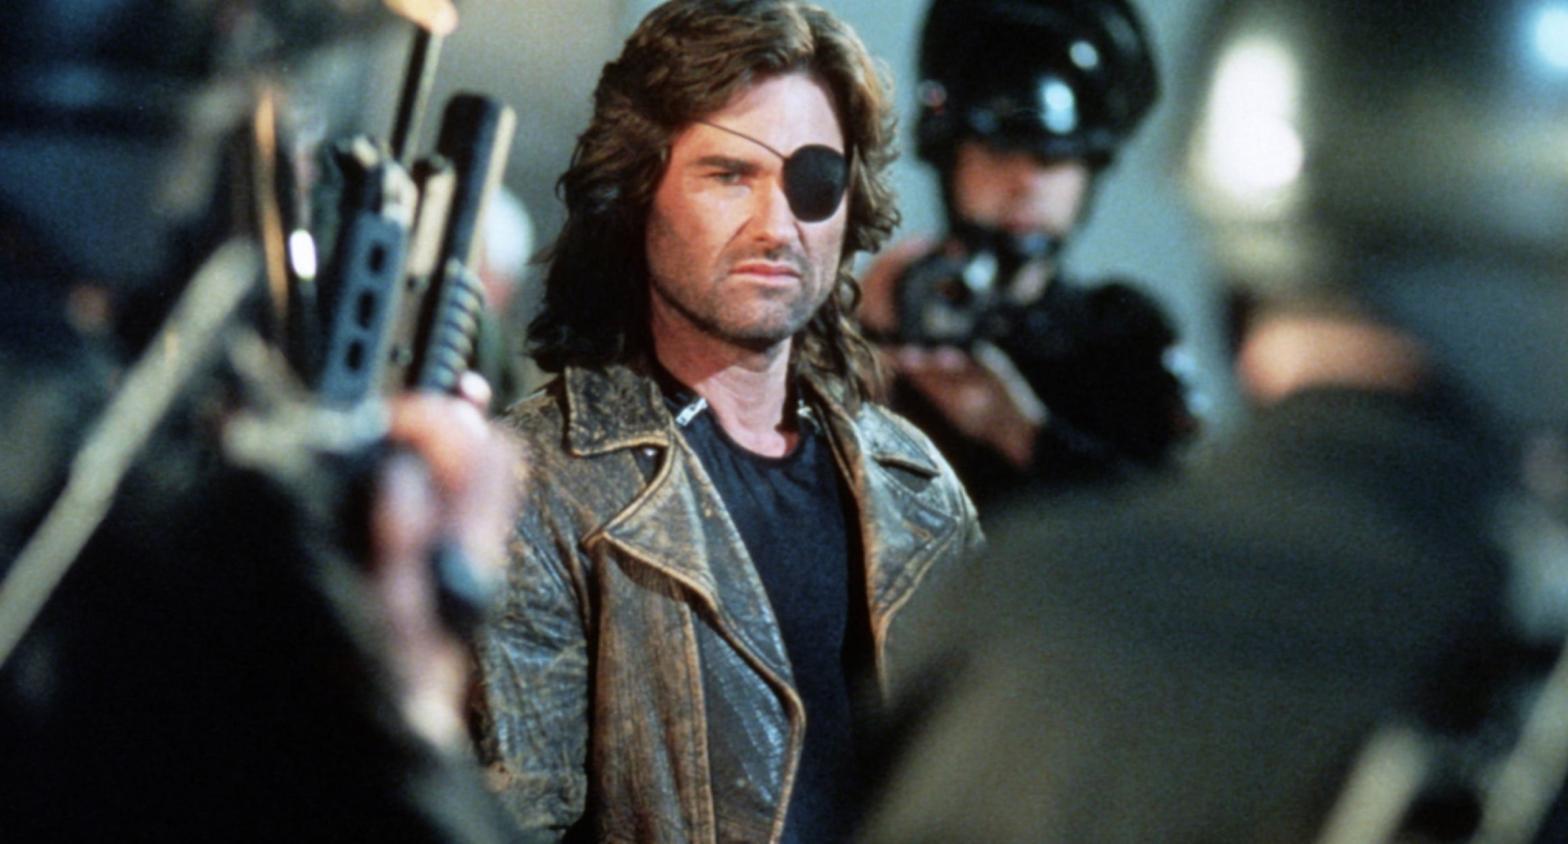 Will Snake slither his way back to the big screen? (Image: Fox)